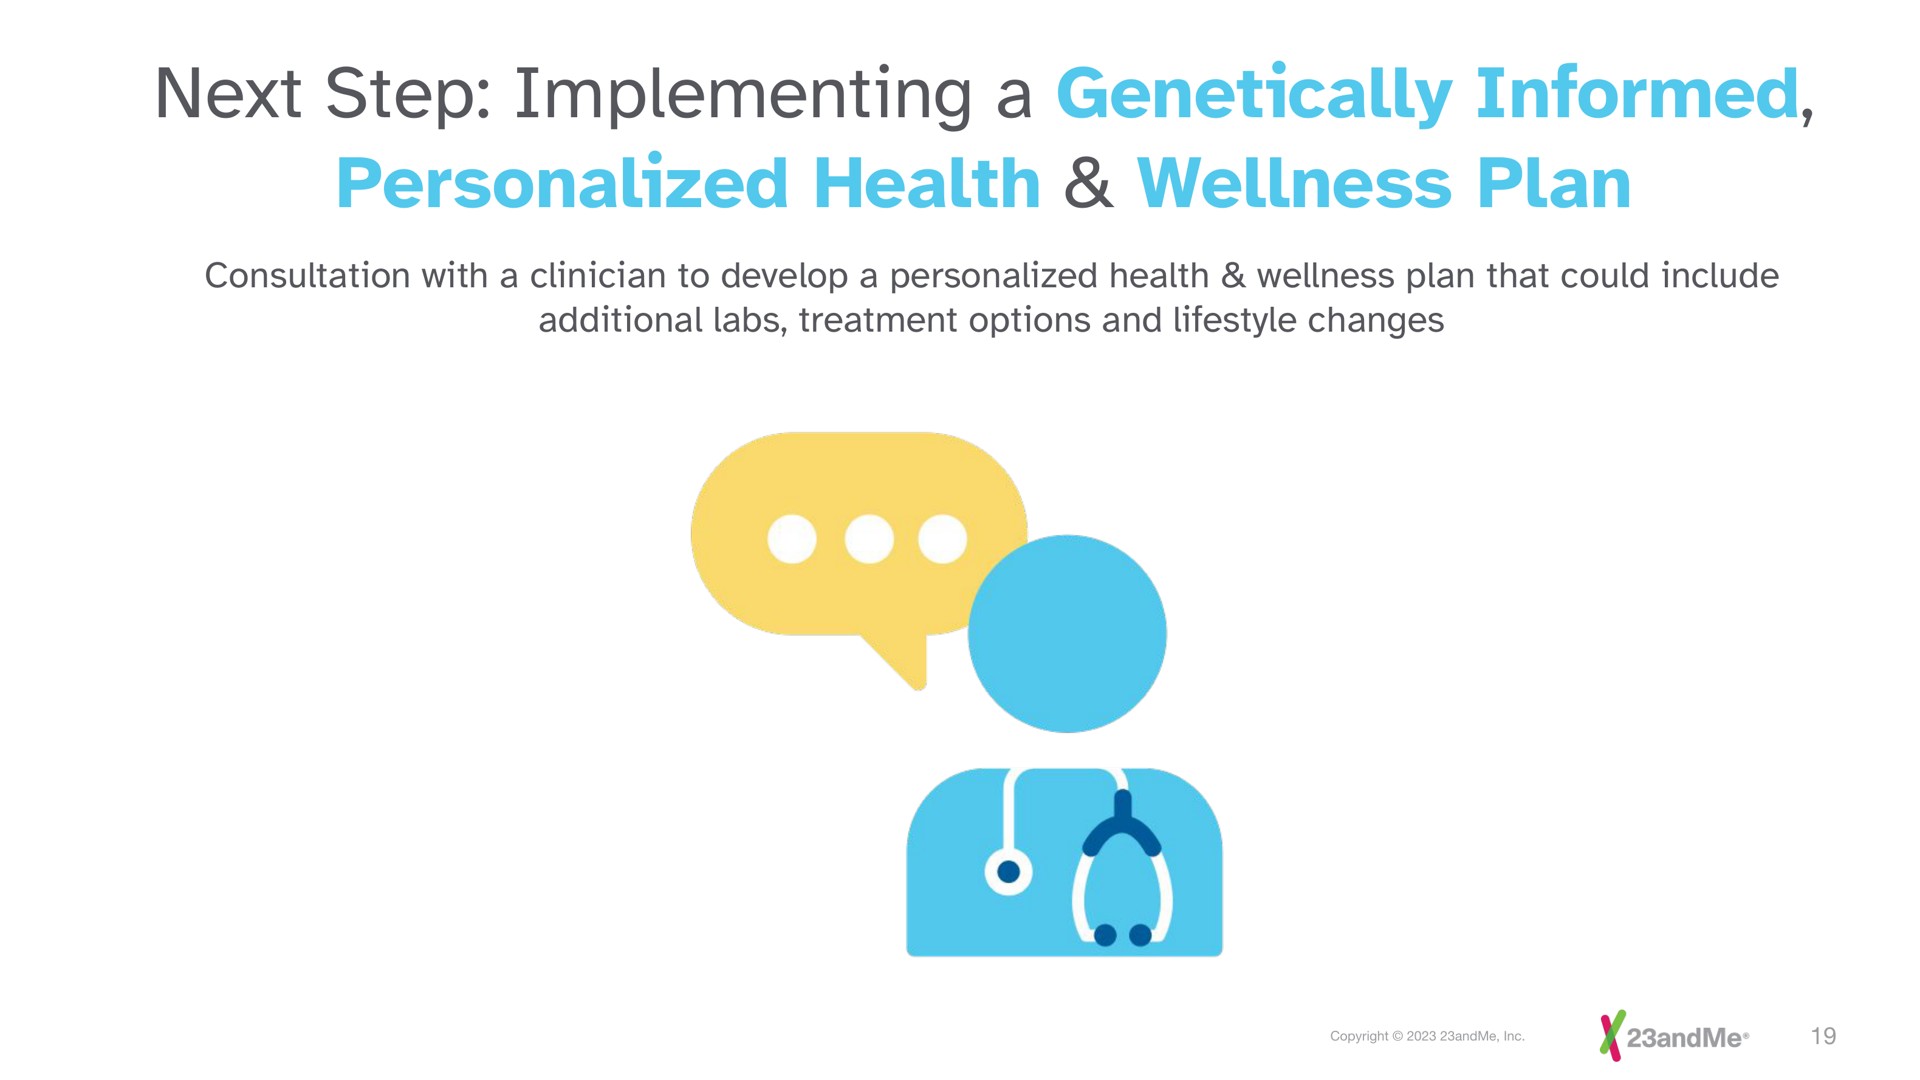 next step implementing a genetically informed personalized health wellness plan | 23andMe